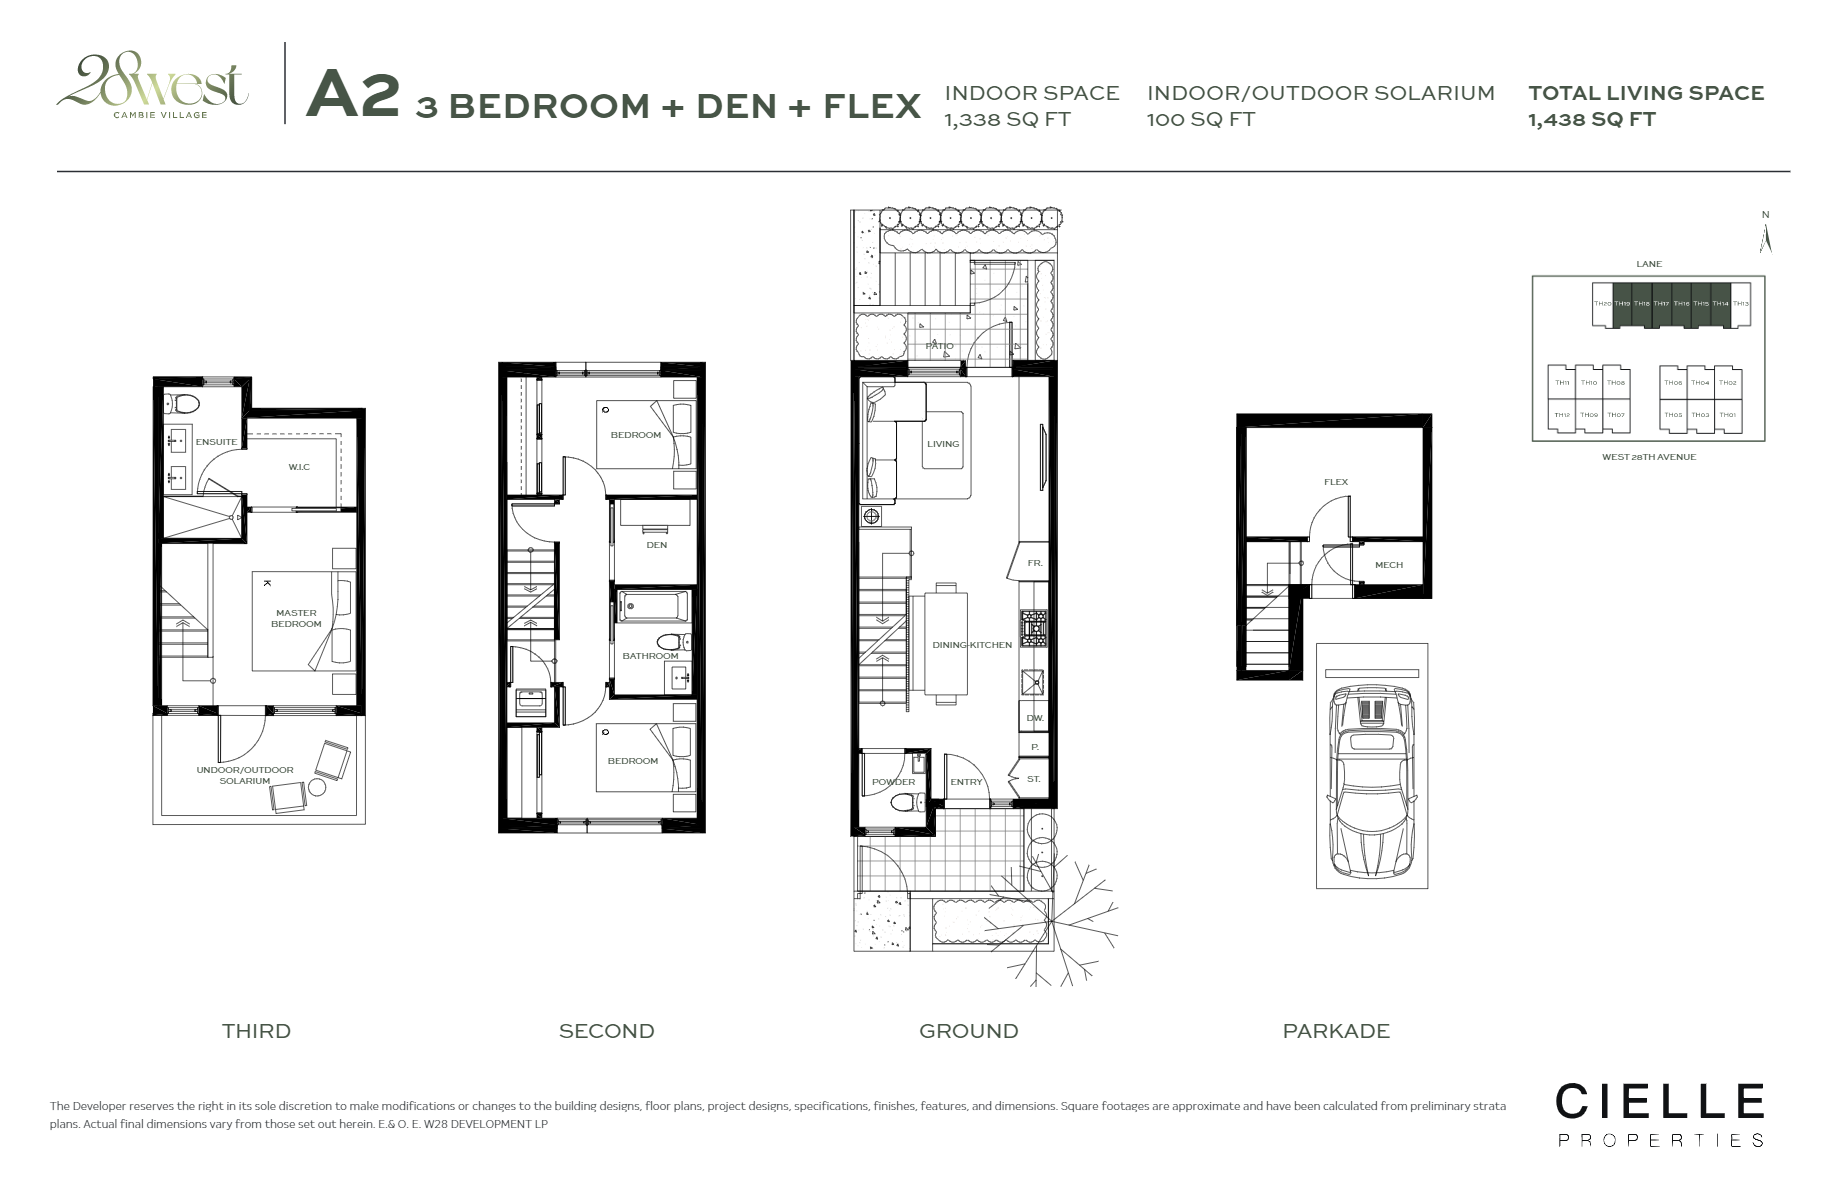 Suite A2 Floor Plan of 28West Towns with undefined beds